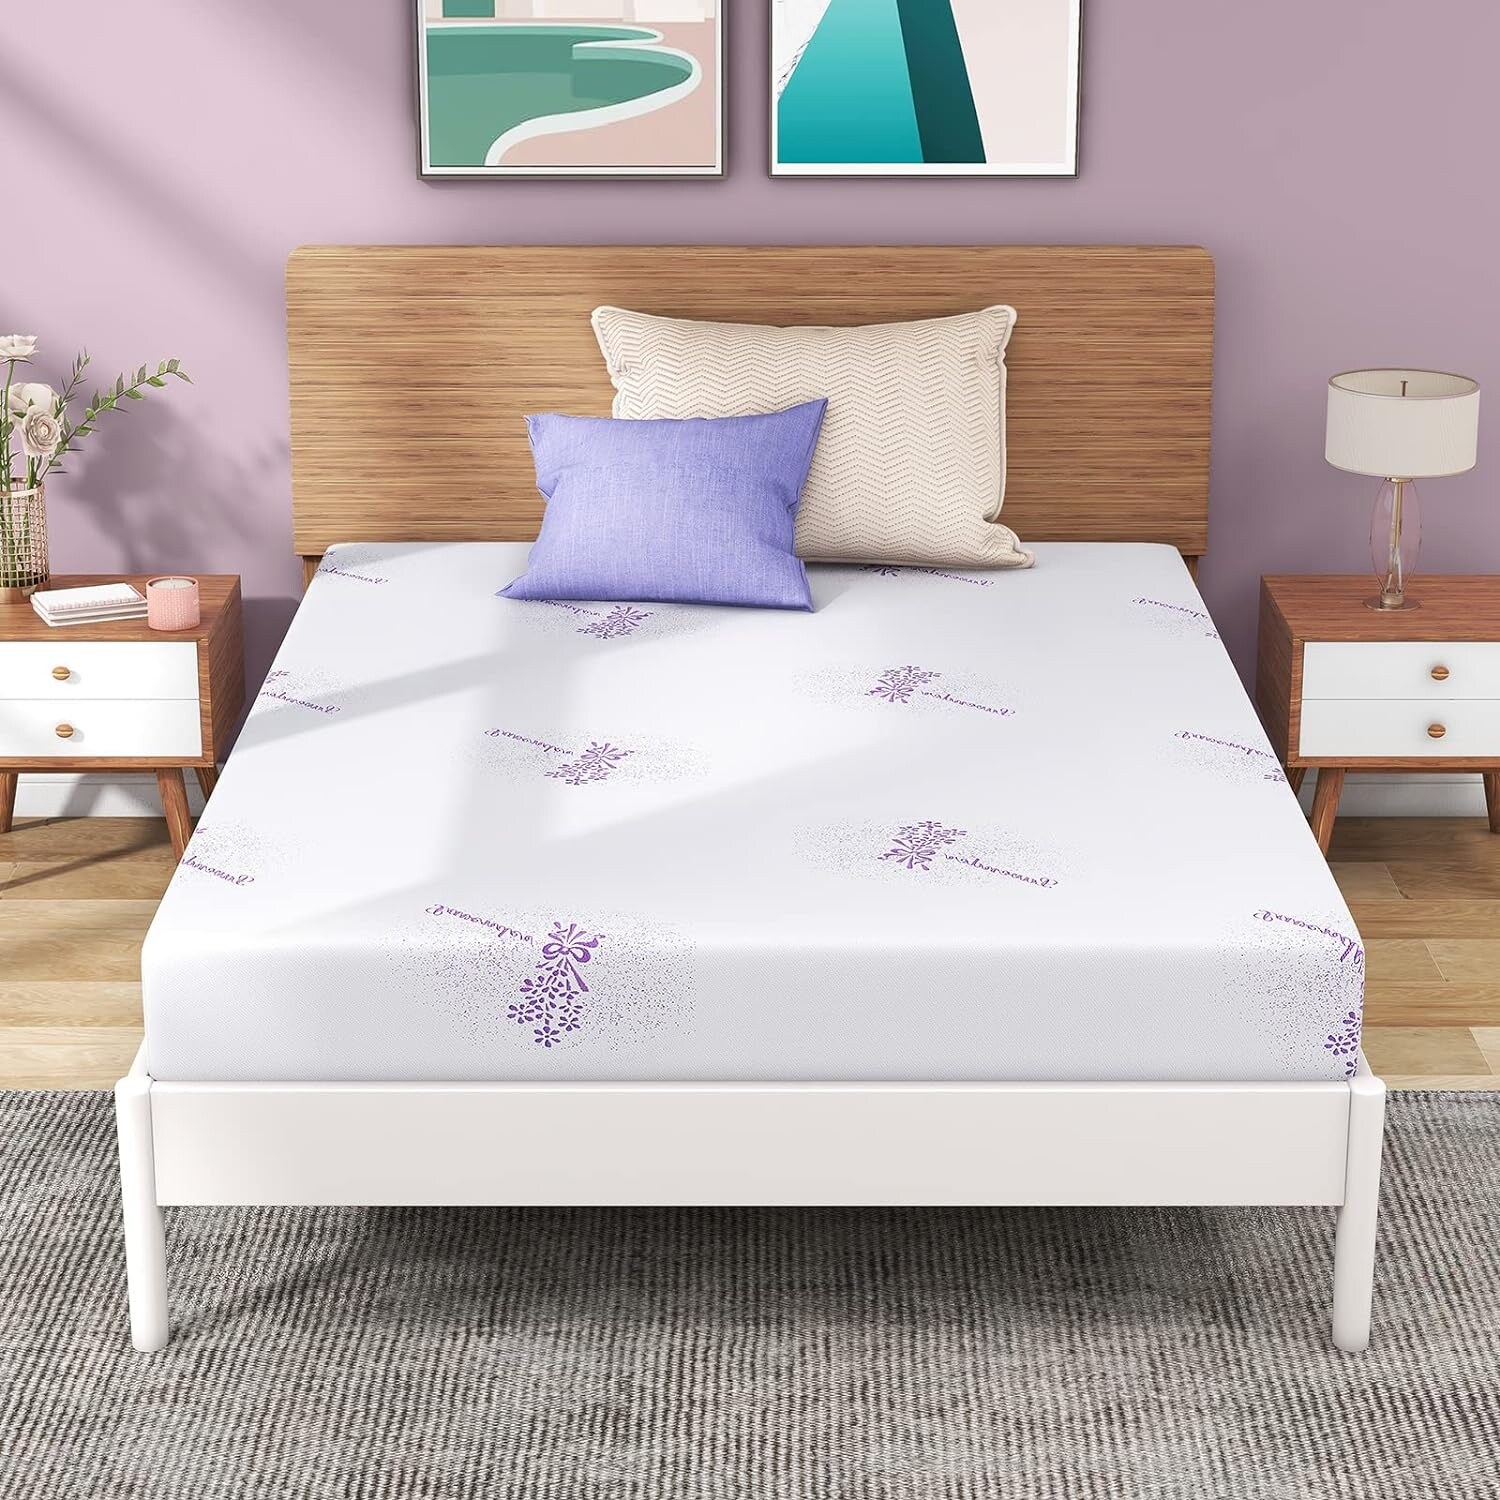 8 Inch Memory Foam Mattress In A Box For Kids With Breathable Lavender Cover  Medium Firm Gel Mattress For Bunk Bed  Trundle Bed